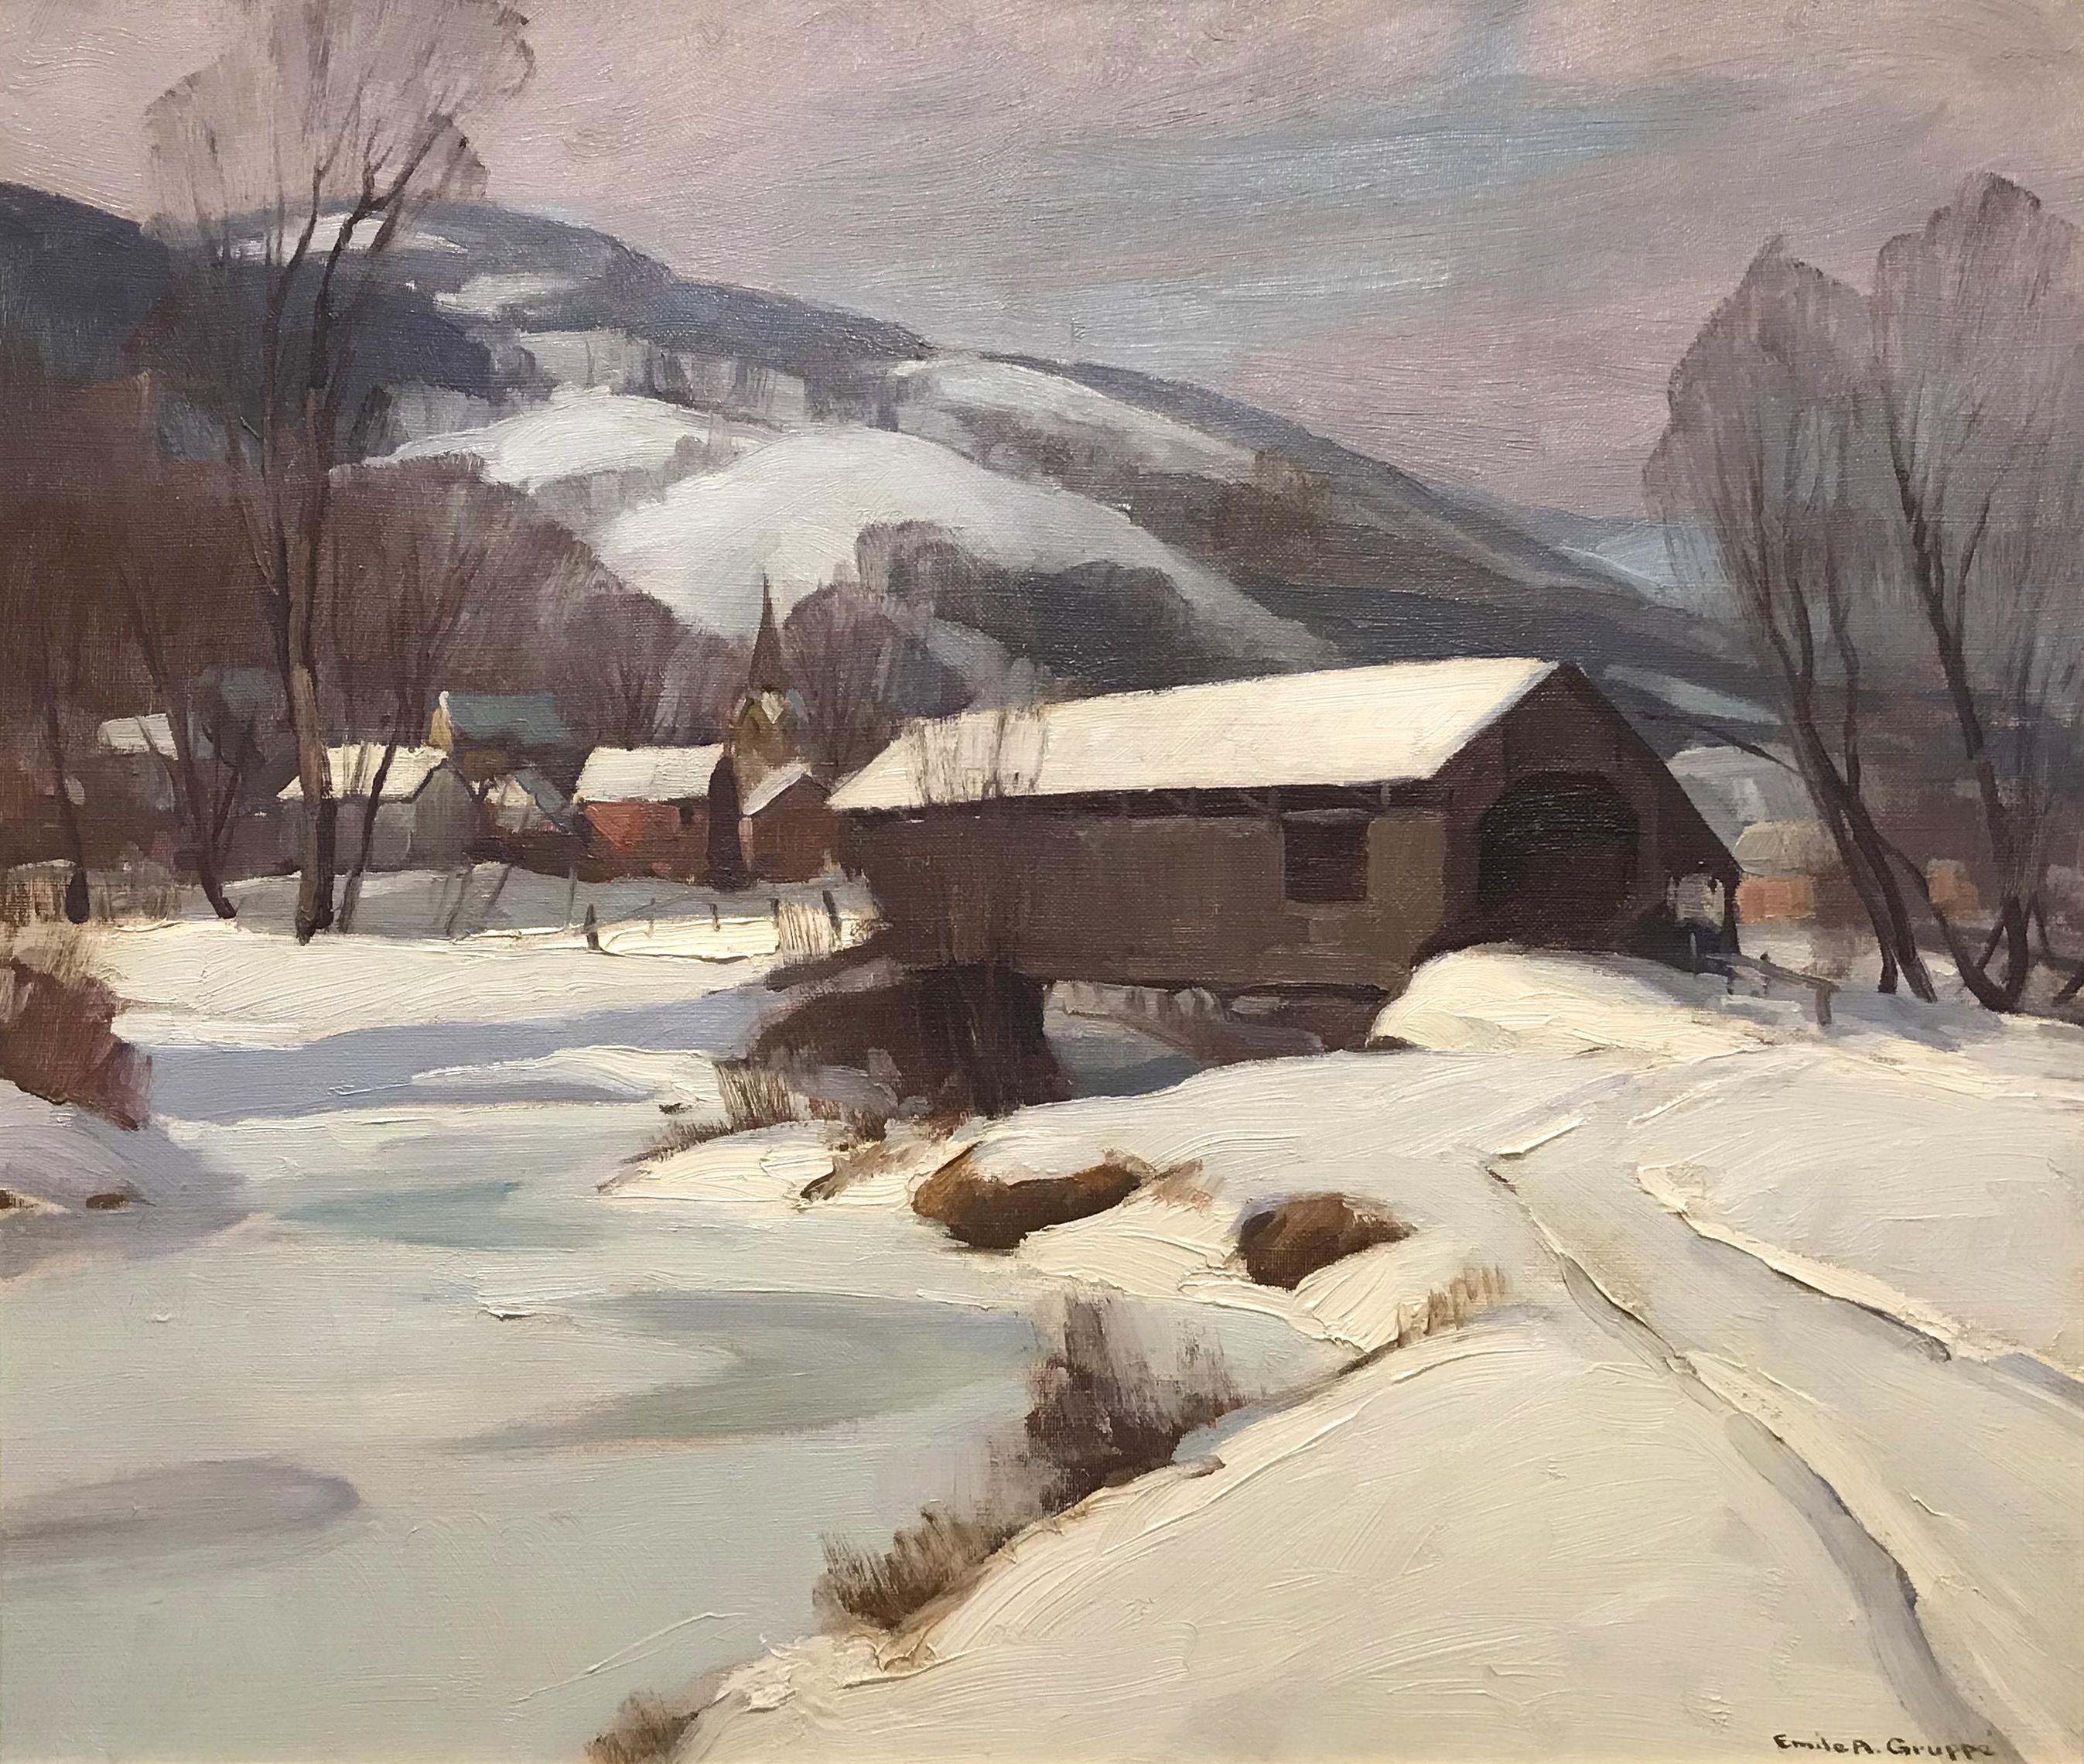 Vermont Covered Bridge - Painting by Emile Albert Gruppe